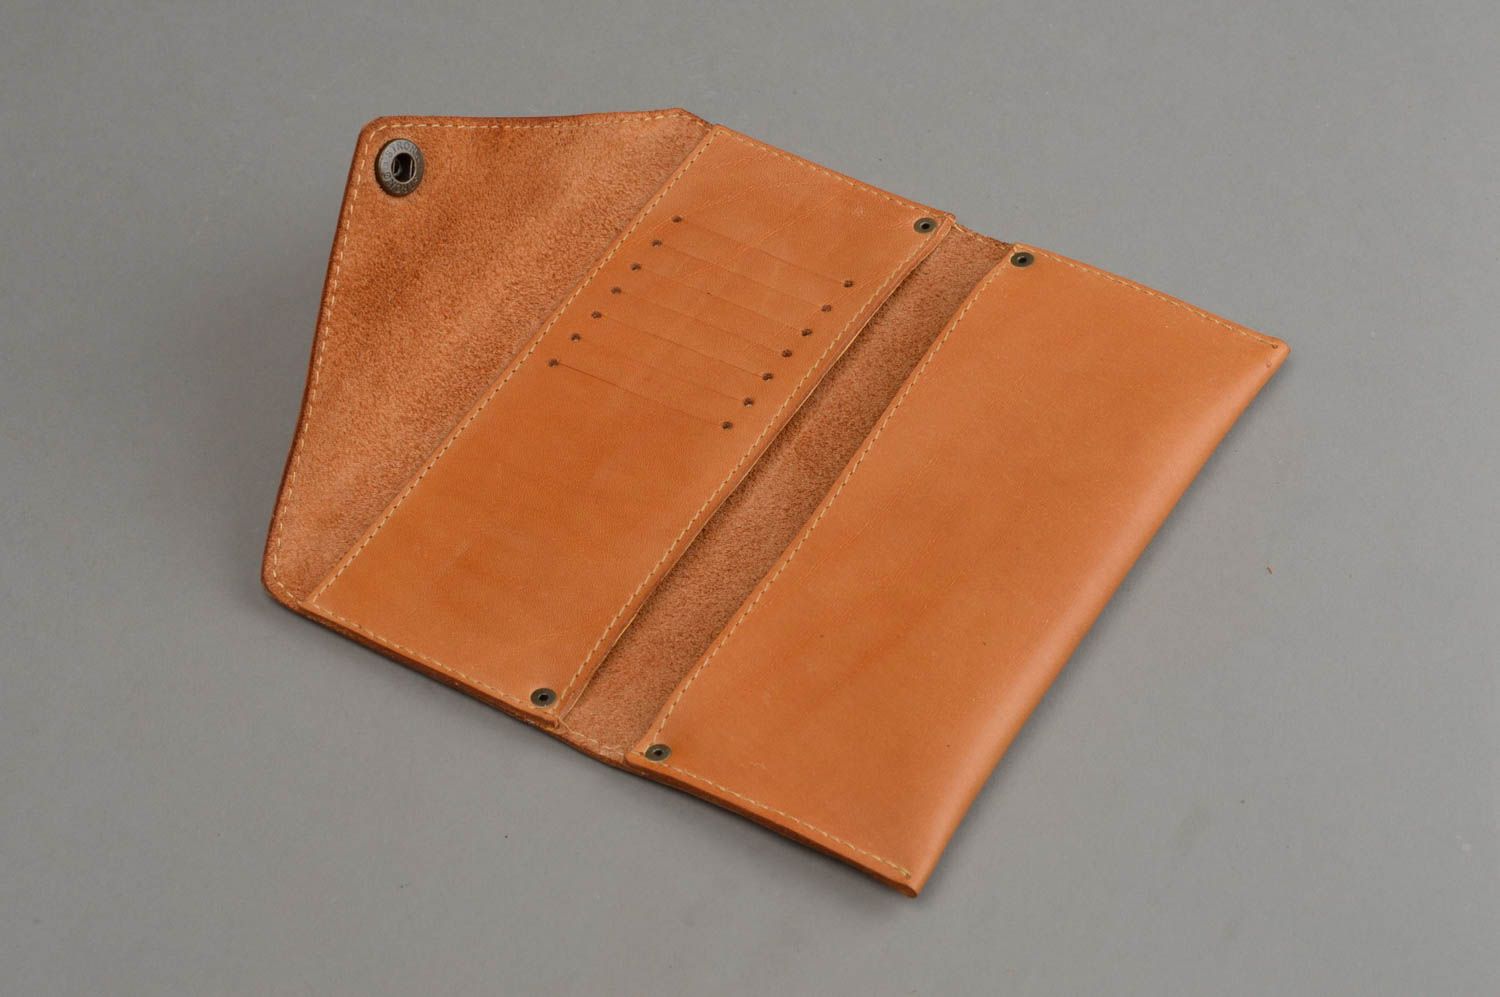 Small handcrafted leather wallet unusual leather purse designs best gift ideas photo 4